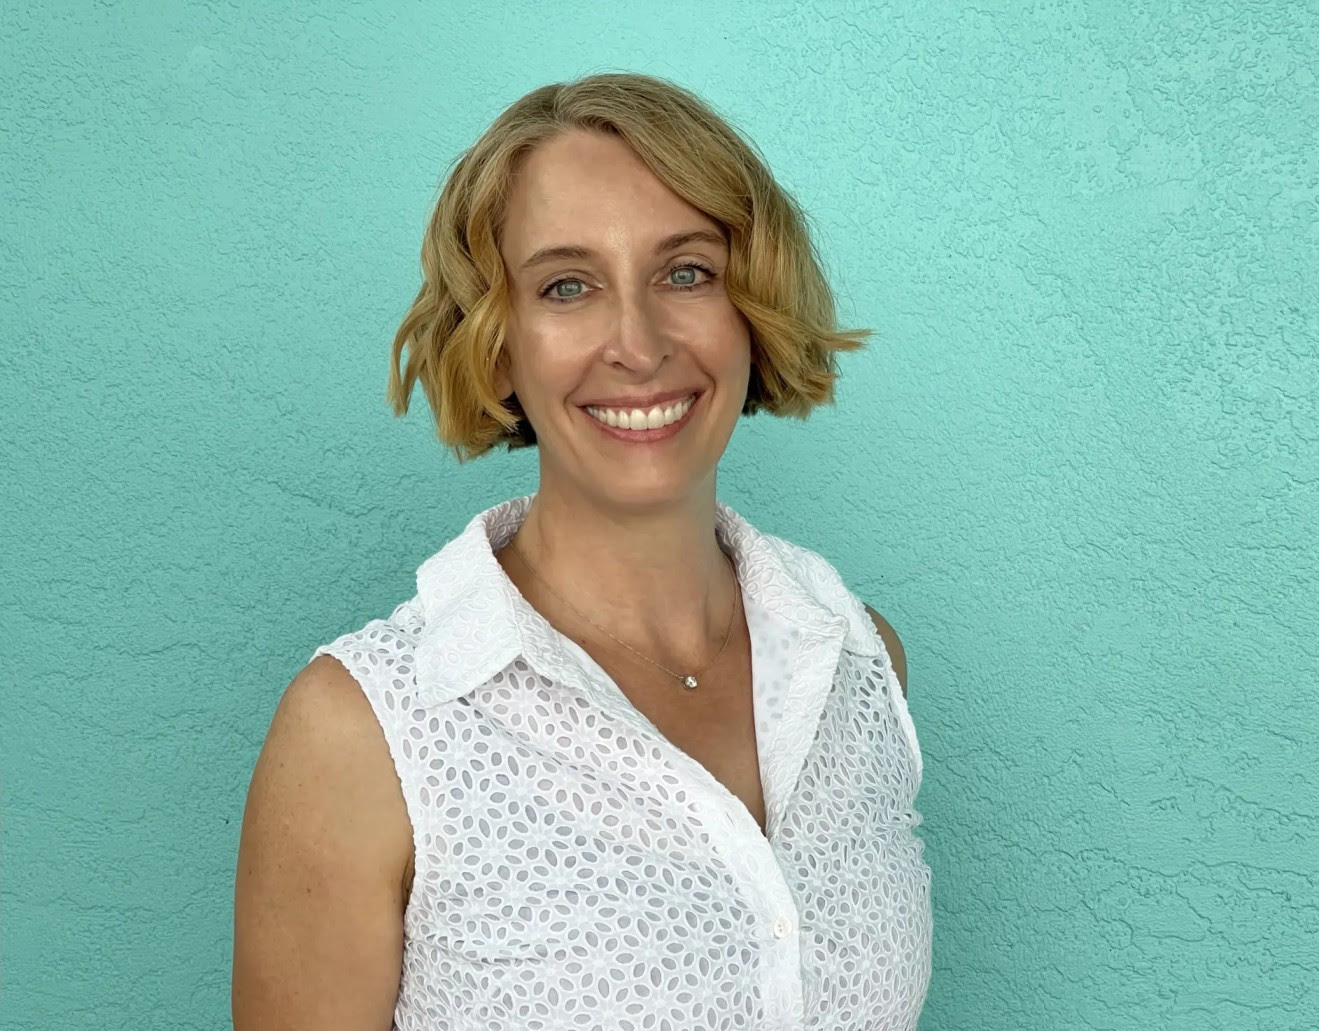 Image of Dr. Jen Golbeck. She is standing in front of a teal wall, smiling.